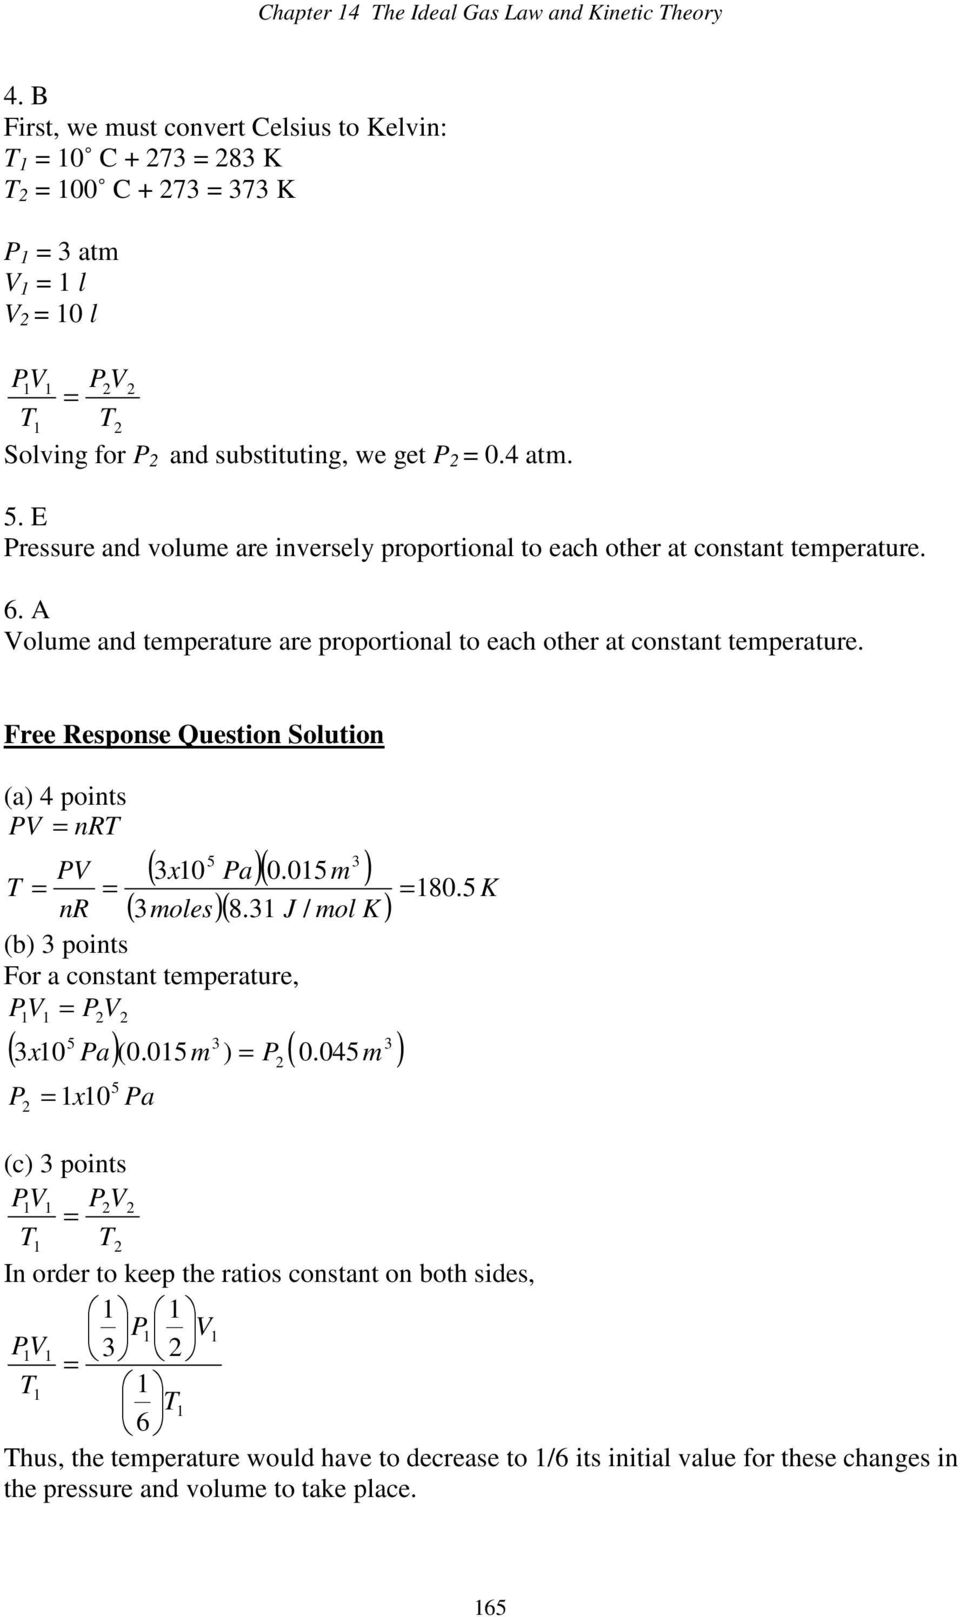 THE IDEAL GAS LAW AND KINETIC THEORY - PDF Free Download With Ideal Gas Laws Worksheet